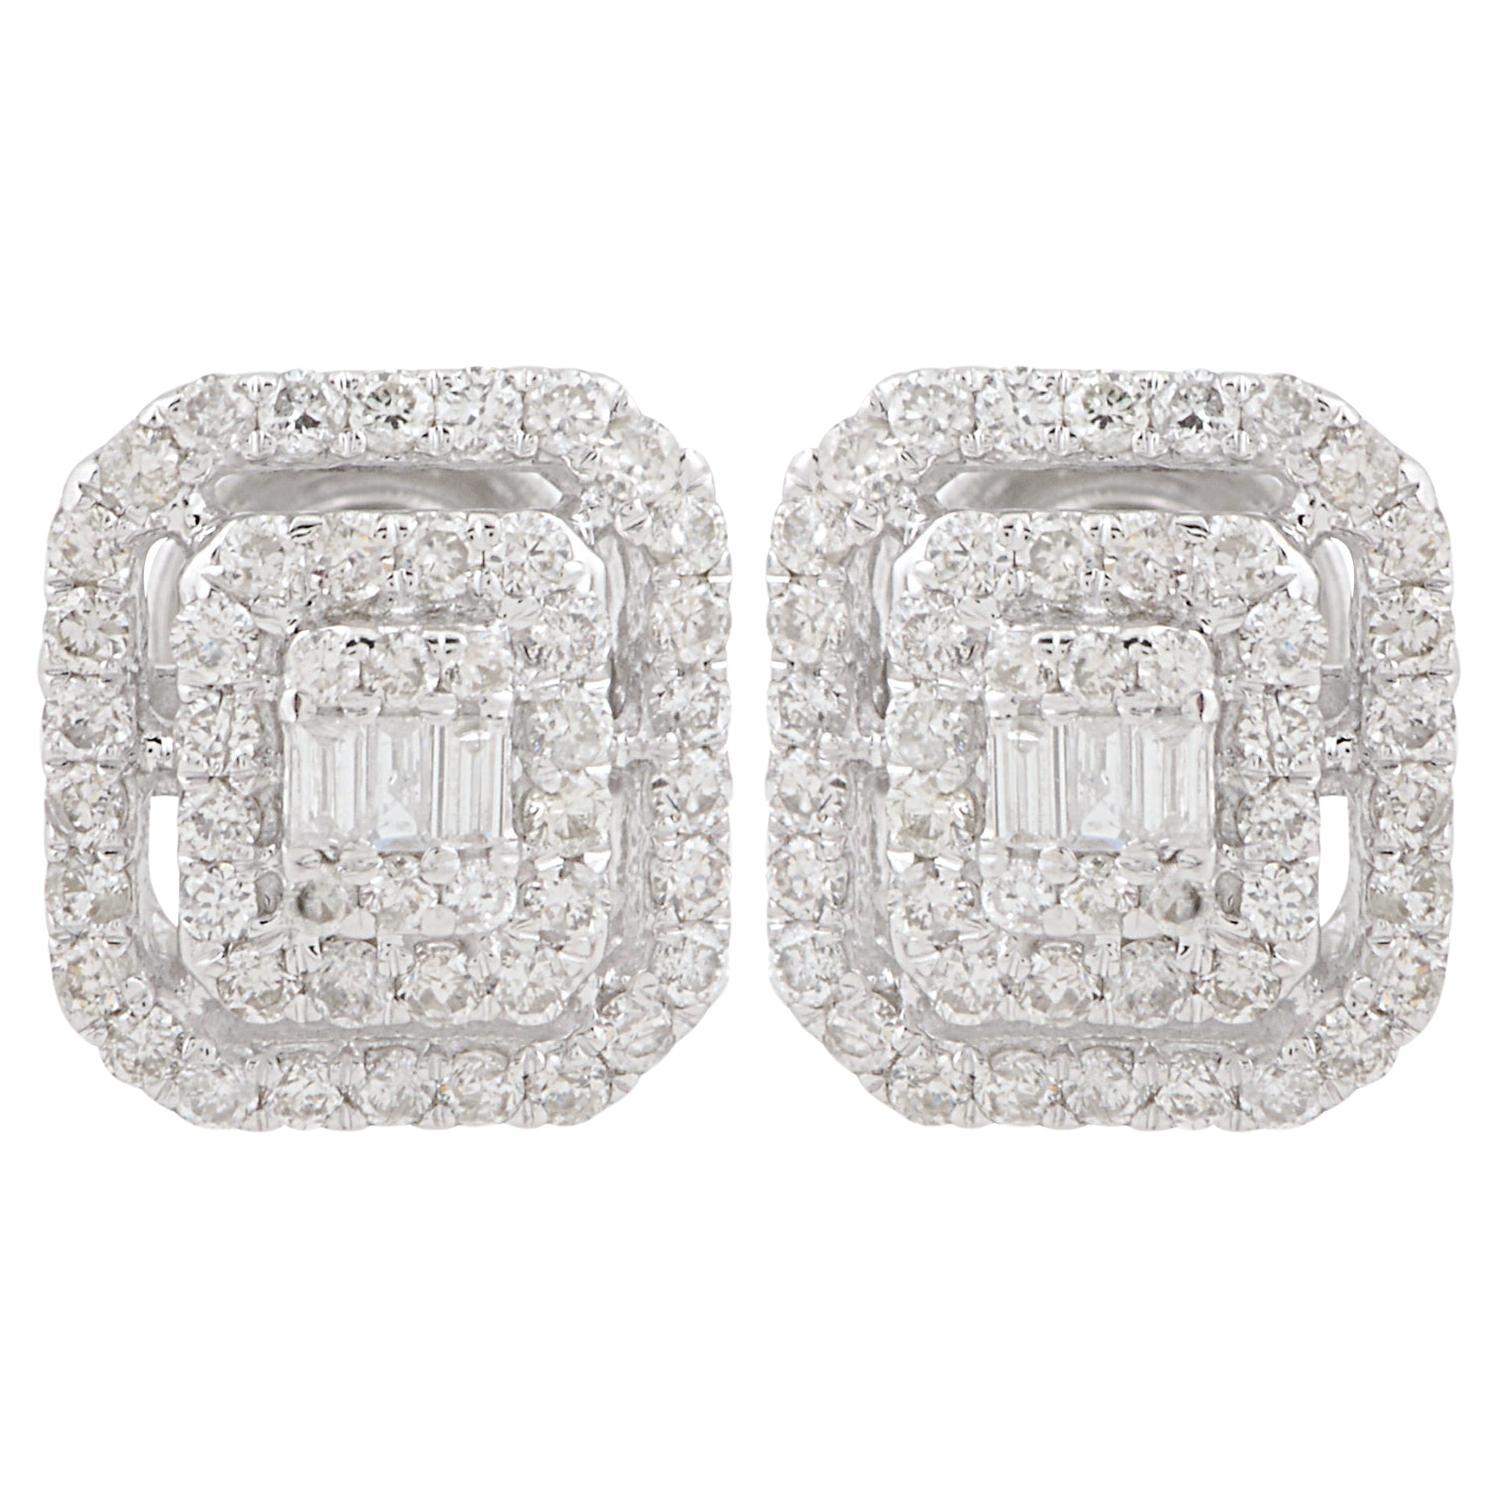 Natural 0.35 Carat Baguette Diamond Stud Earrings Solid 10k White Gold Jewelry